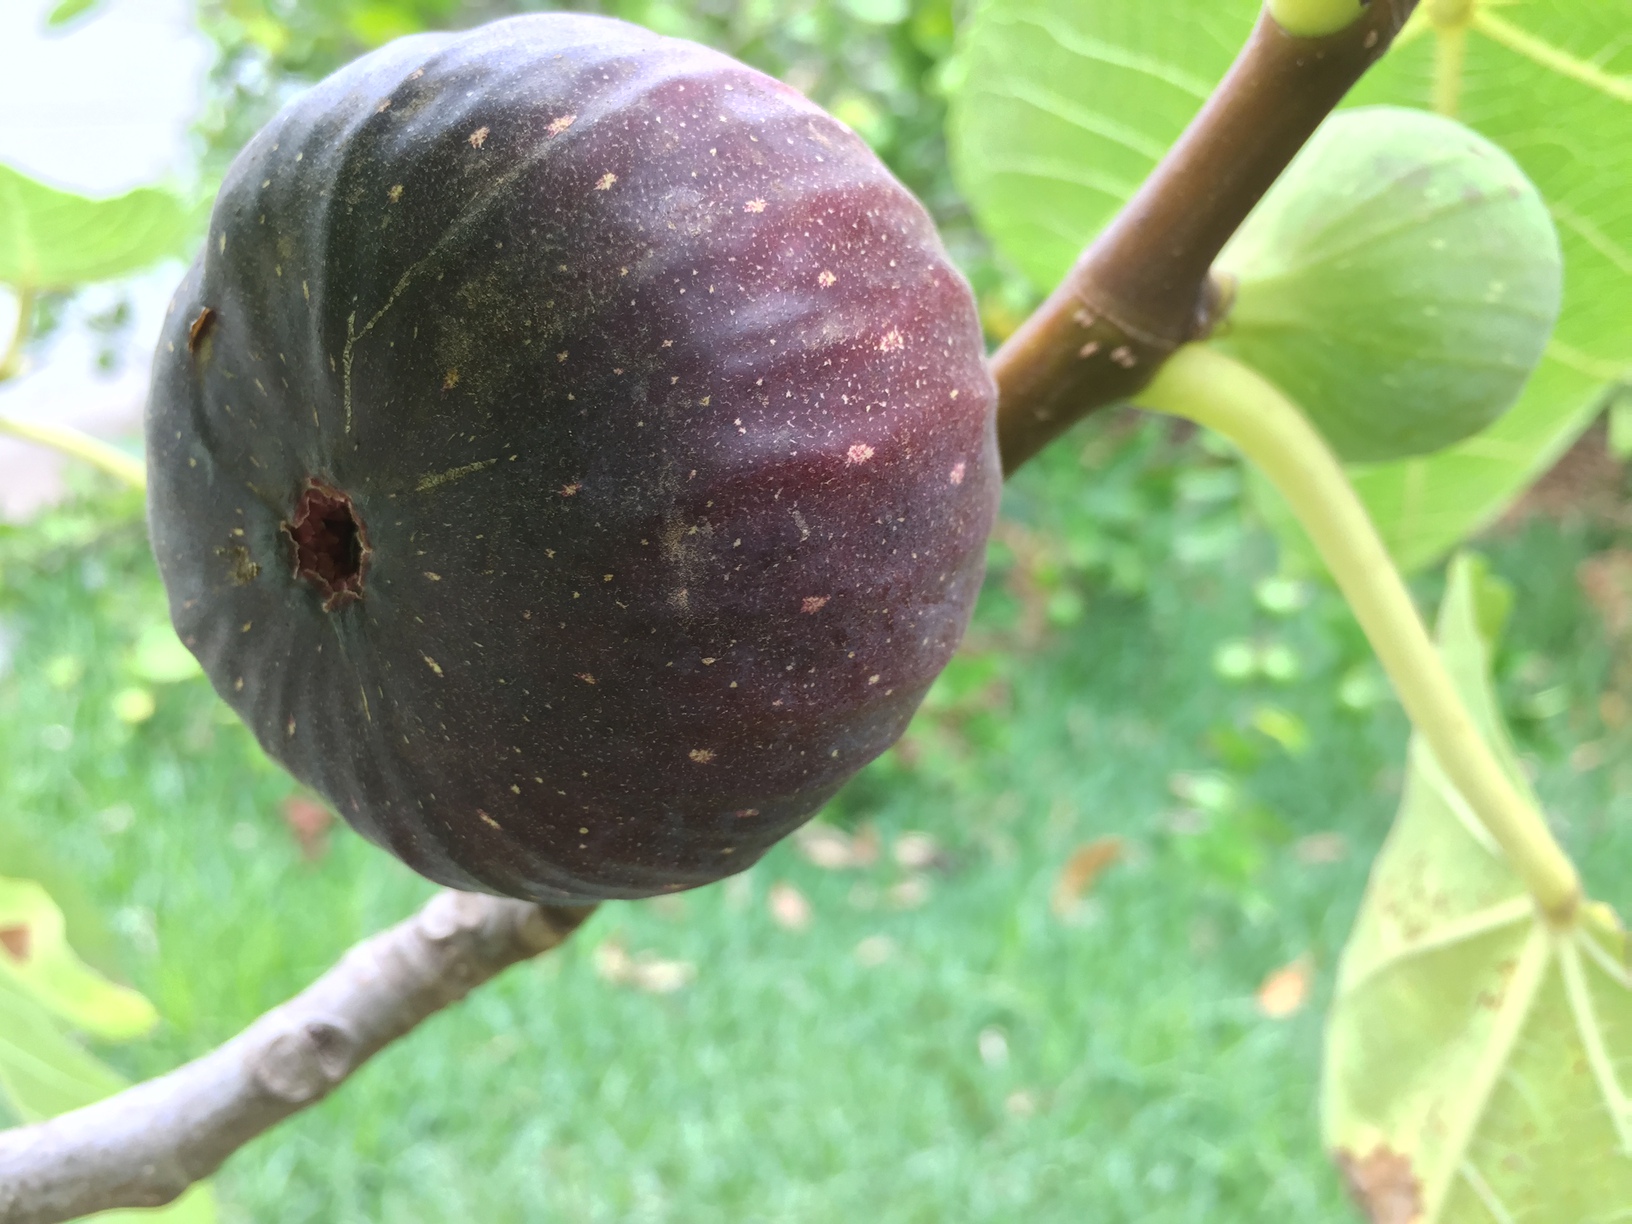 One of the black Genoa figs, almost ready to eat